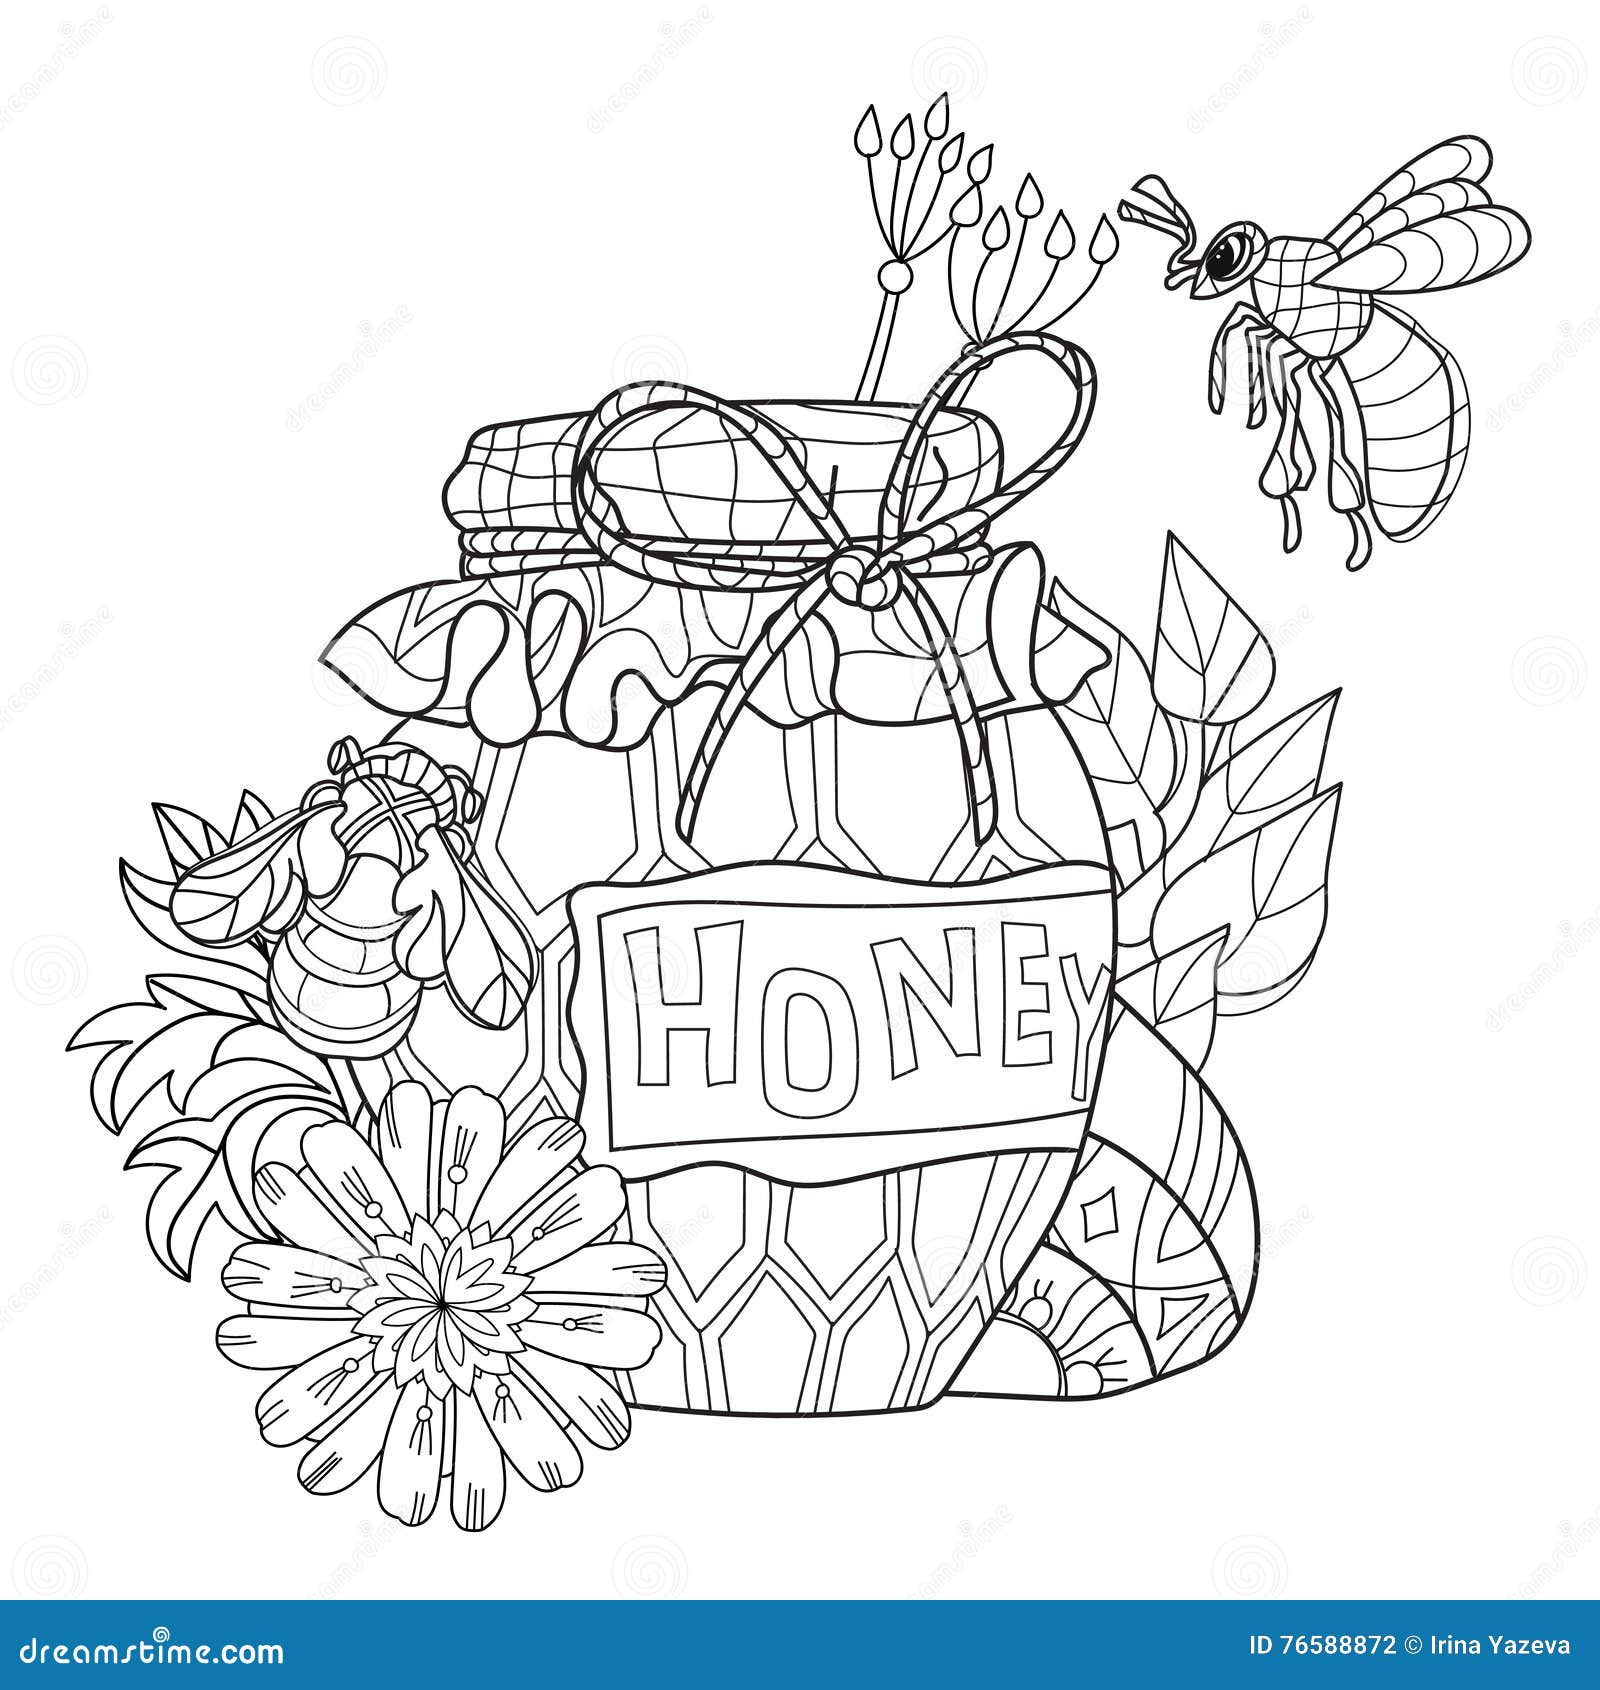 Honey Pot Doodle and Bees  Stock Vector  Illustration of dessert drawn  76588856